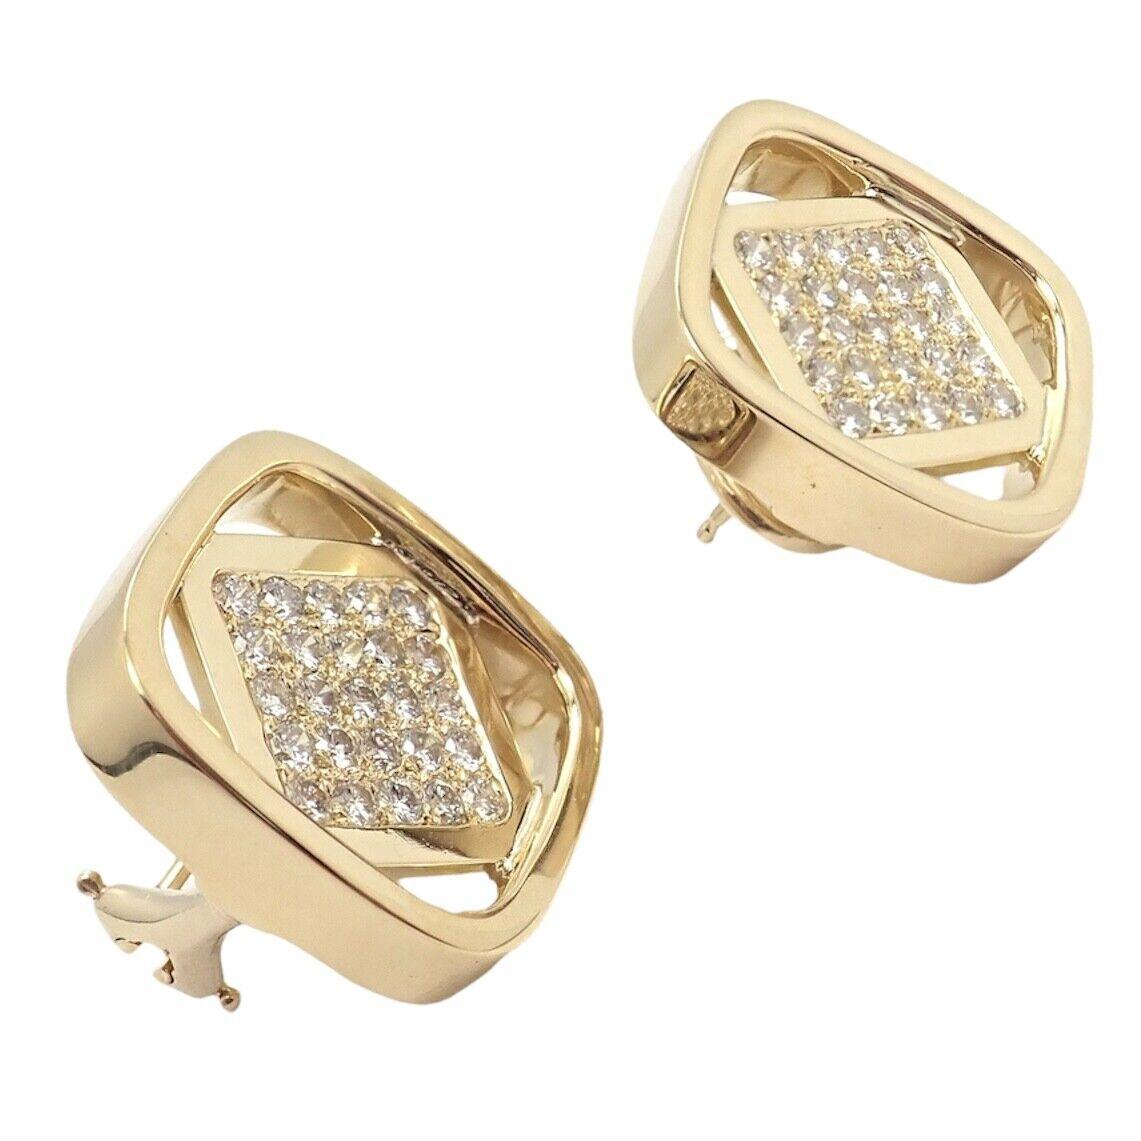 18k Yellow Gold Diamond Earrings by Dinh Van for Cartier from the 1970's.
With 50 round brilliant cut diamonds VVS1 clarity, E color total weight approximately 1.50ct
This stunning pair of earrings come with a Cartier box.
Details: 
Weight: 18.4